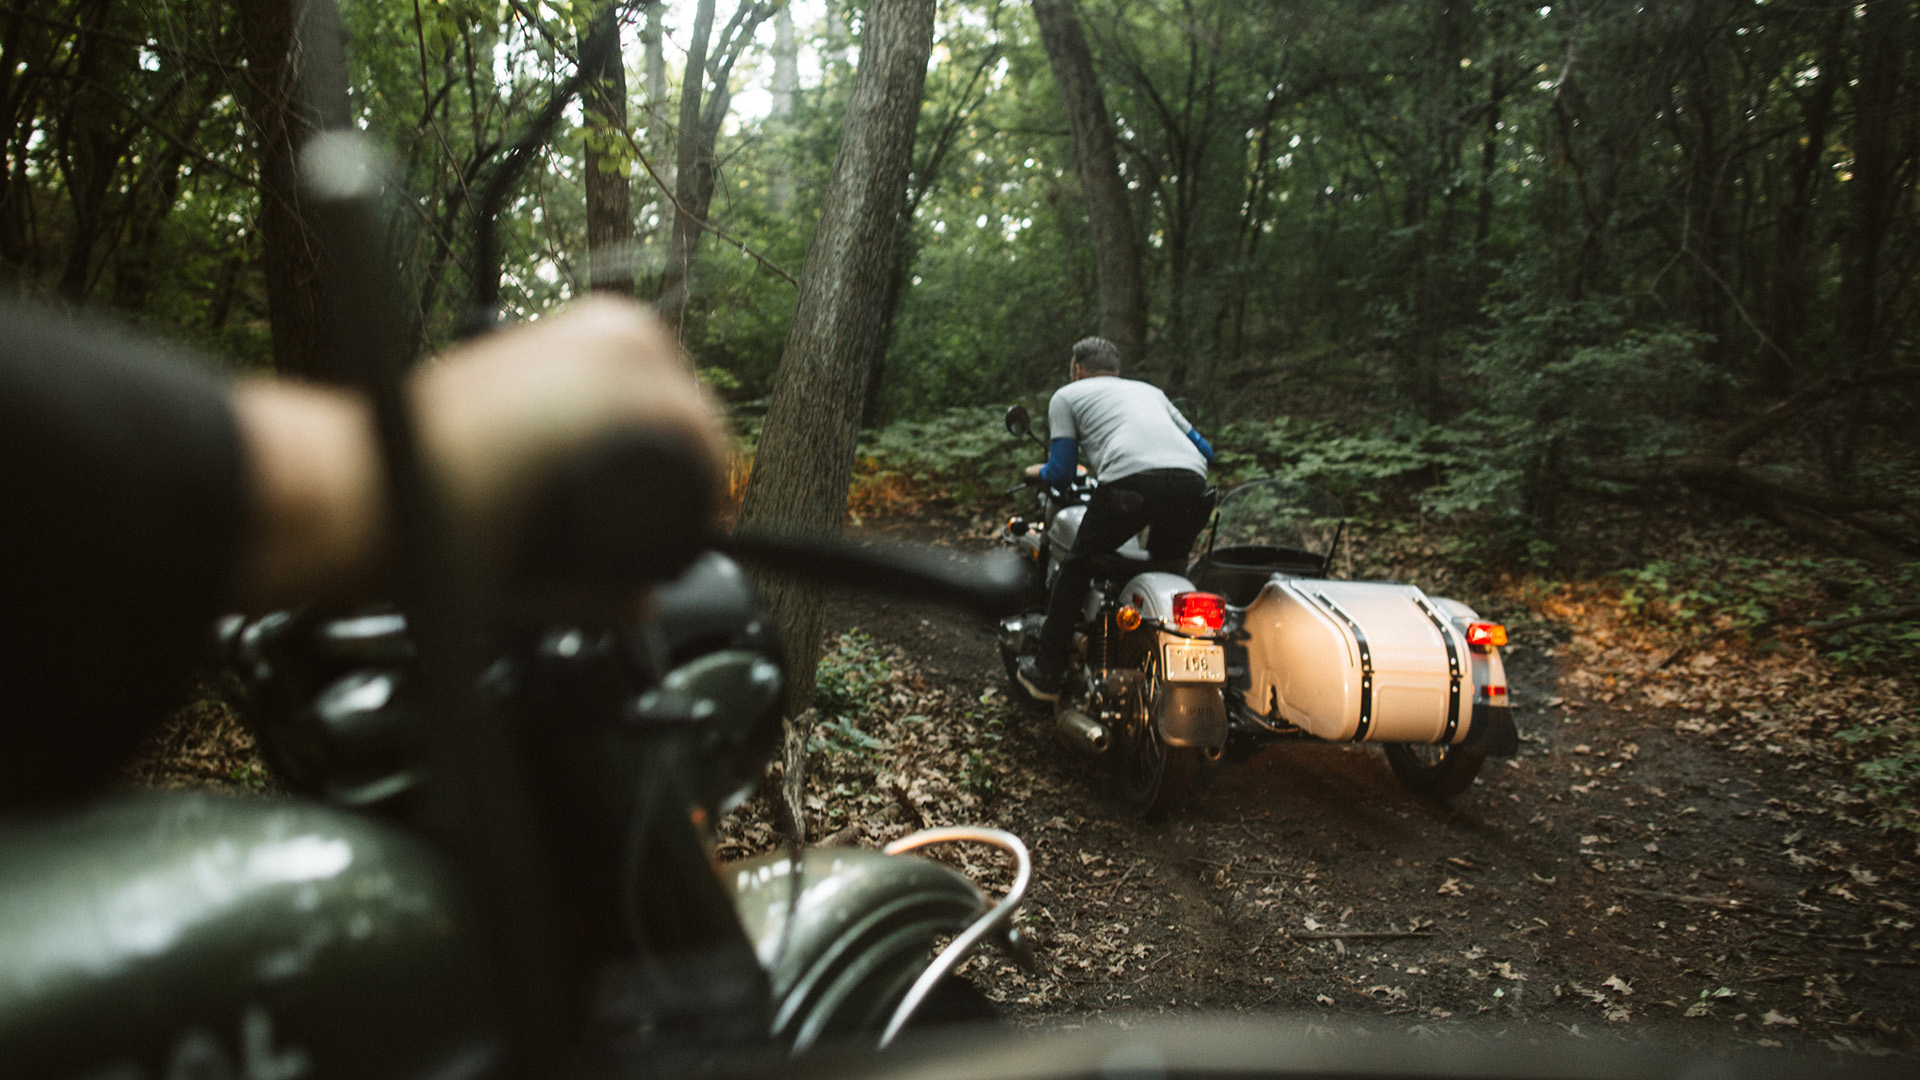 2015 Ural Sidecar Review: WWII Soviet Tech On (And Off) The Road Today